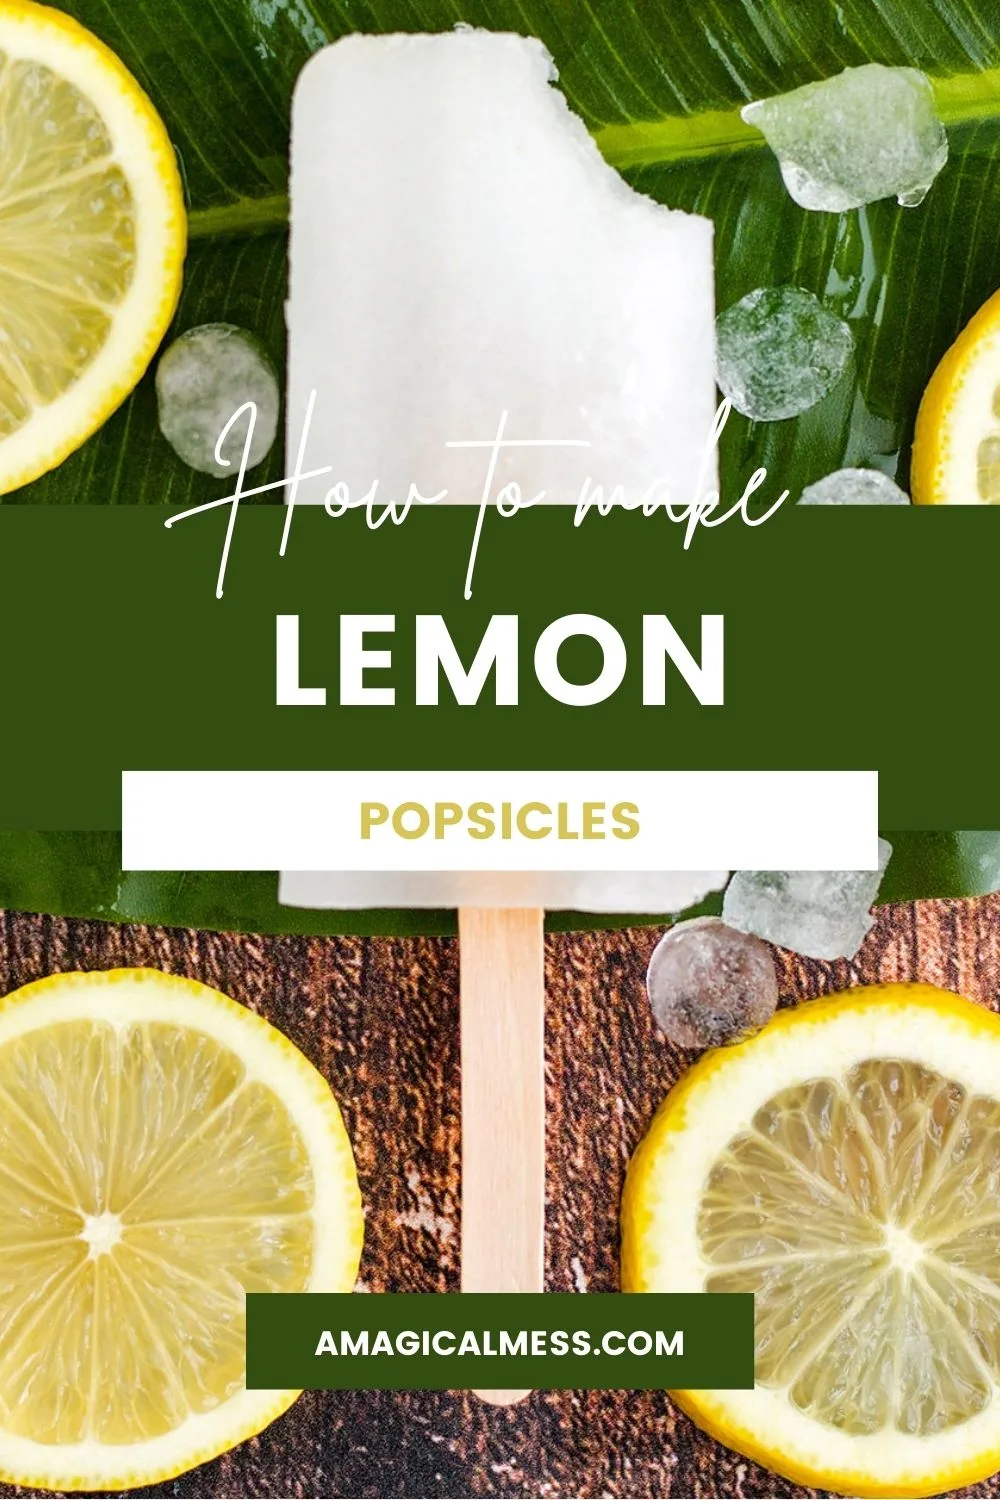 One lemon popsicle with a bite out of it next to lemon slices.